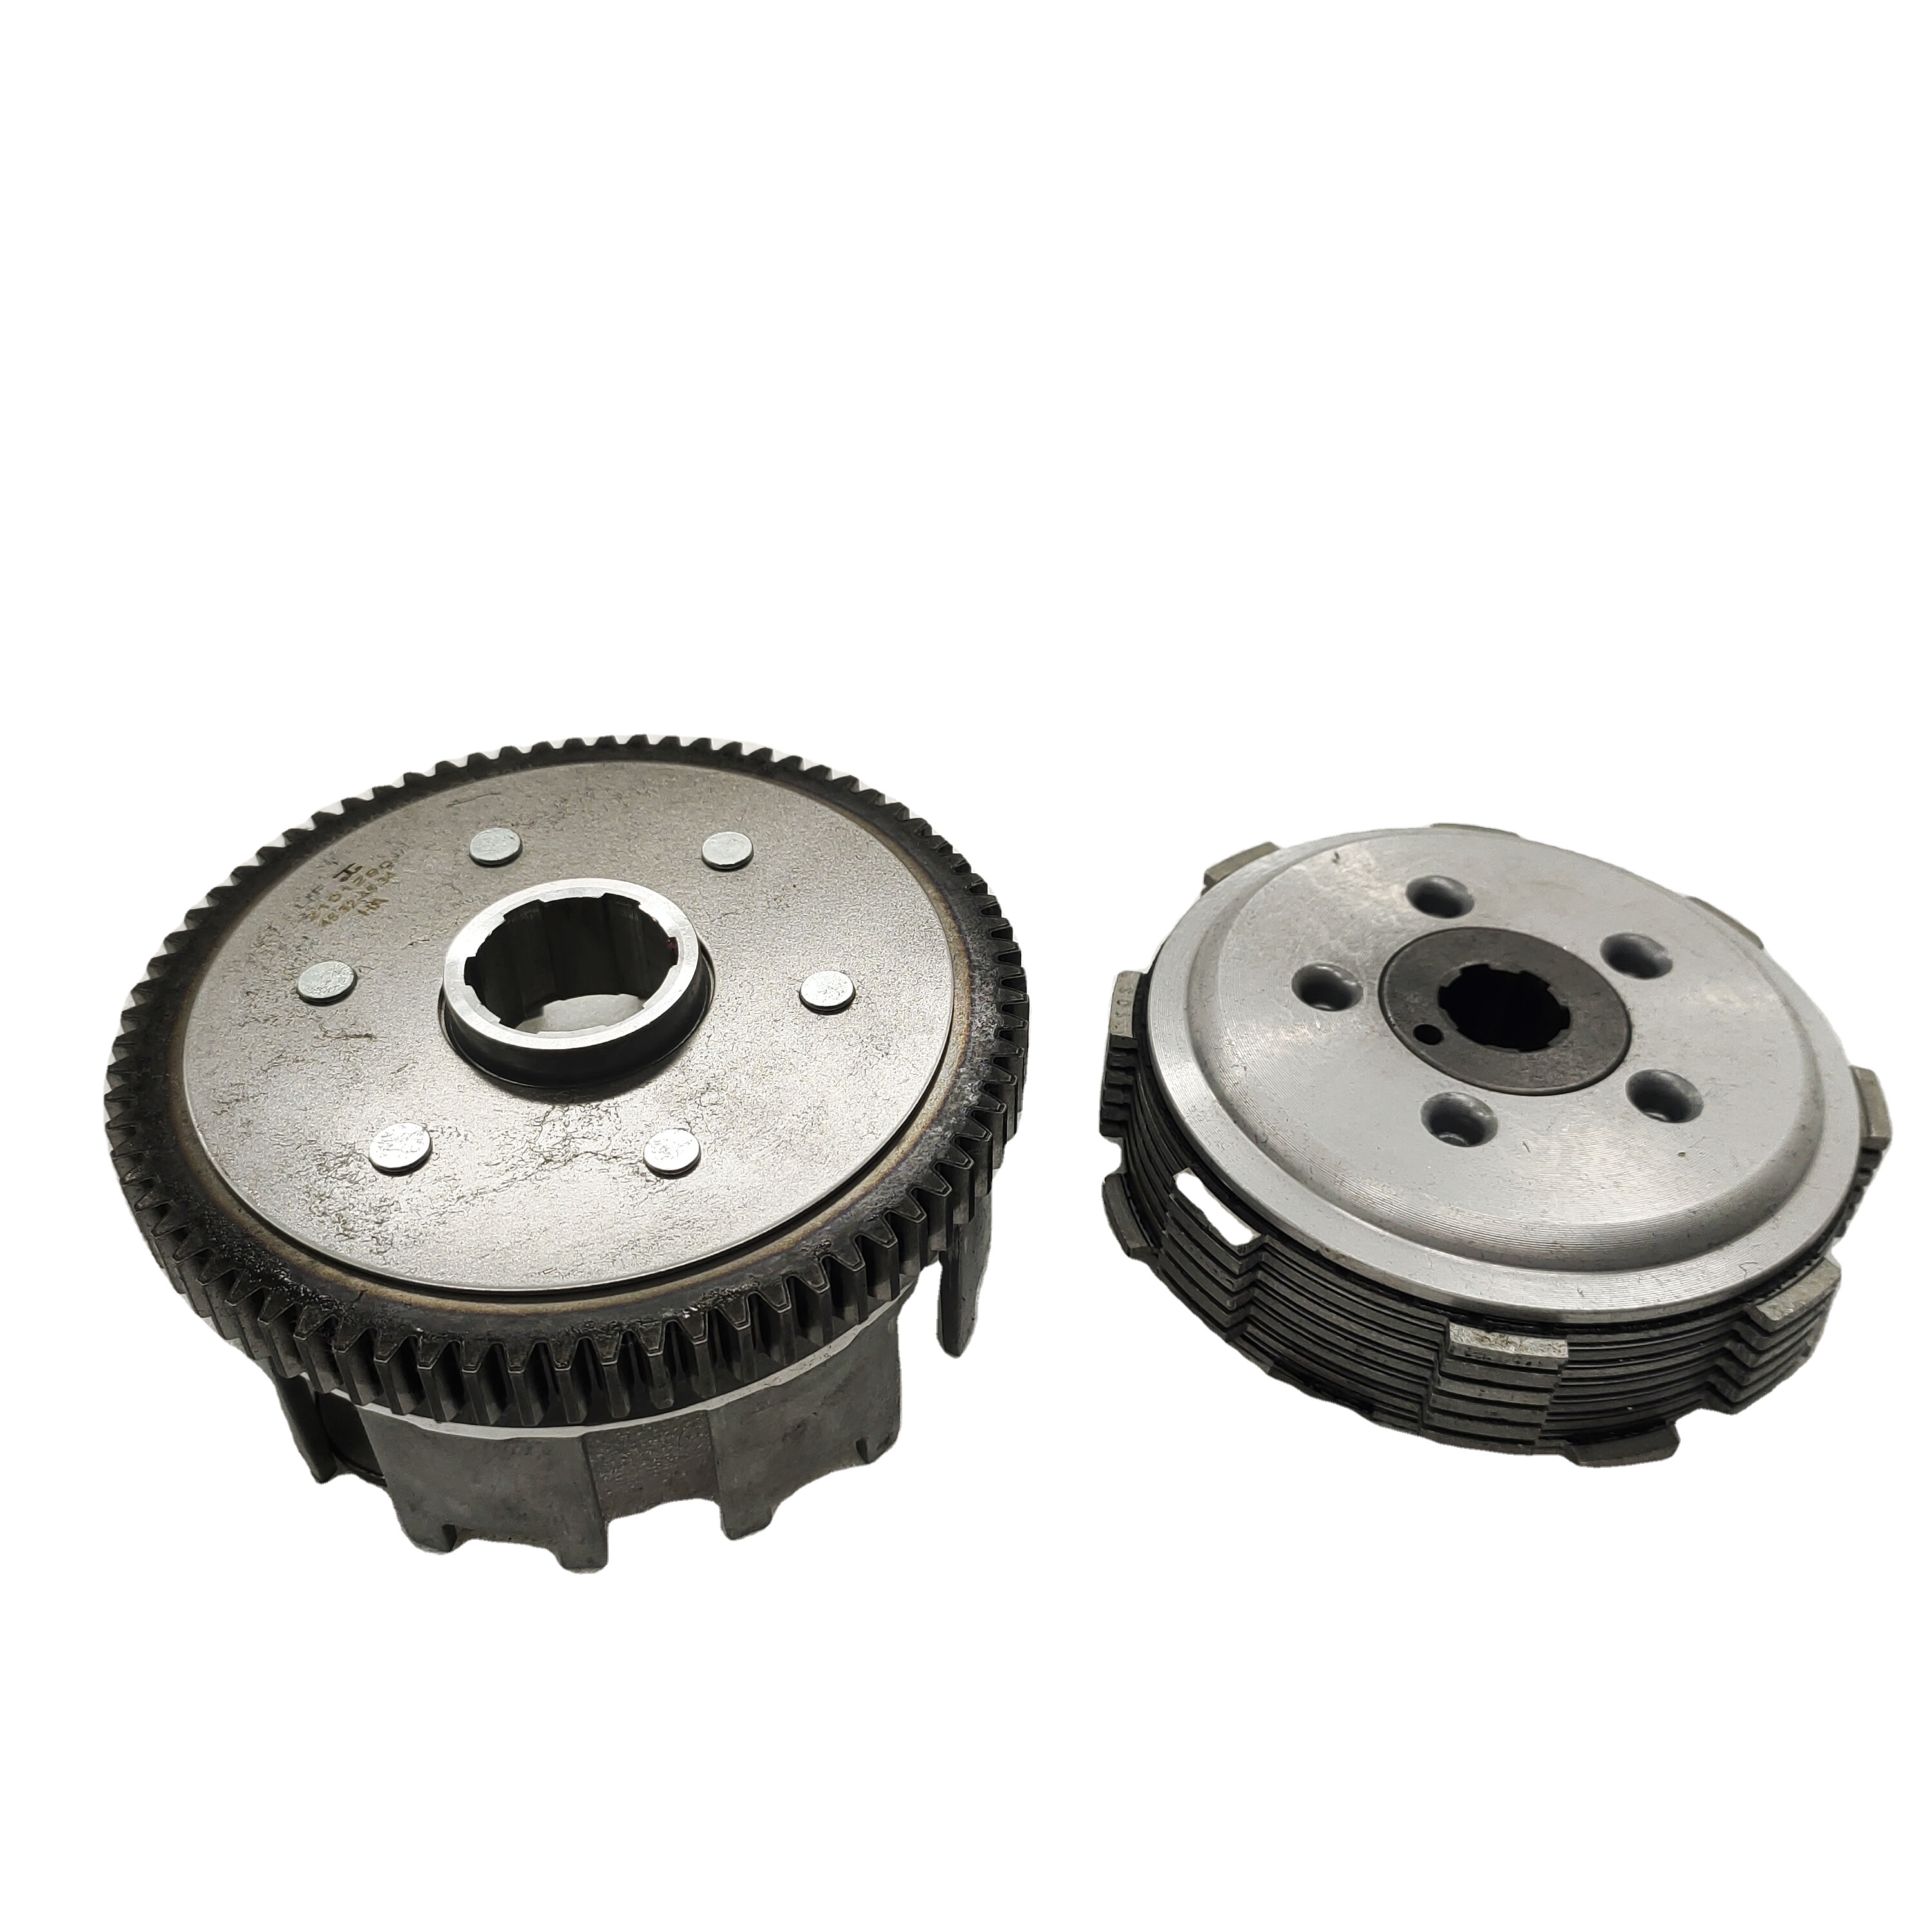 China DAYANG best seeler product tricycle engine spare parts aluminum alloy clutch assembly for global market